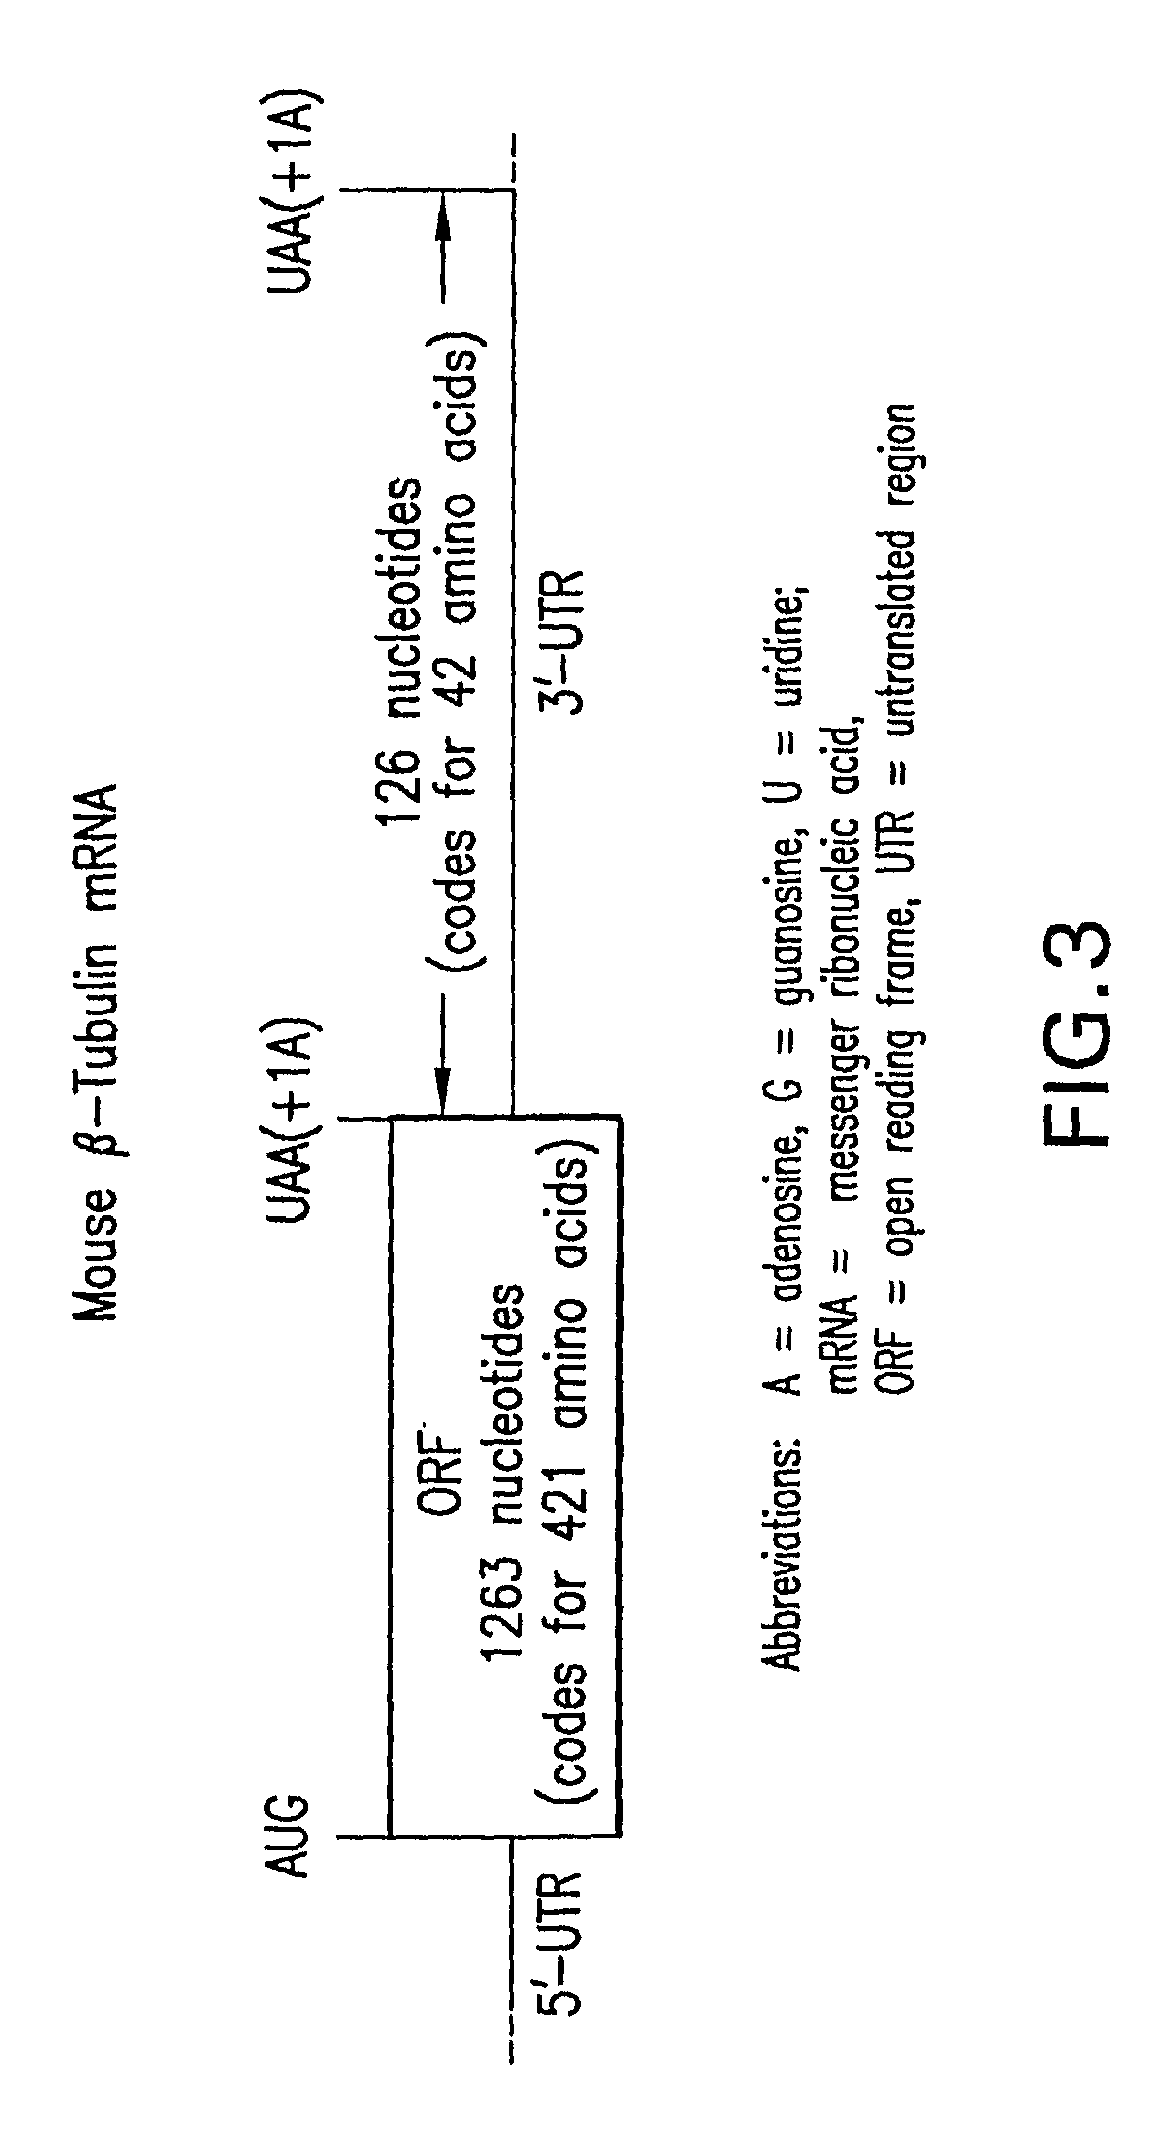 Methods for the production of functional protein from DNA having a nonsense mutation and the treatment of disorders associated therewith